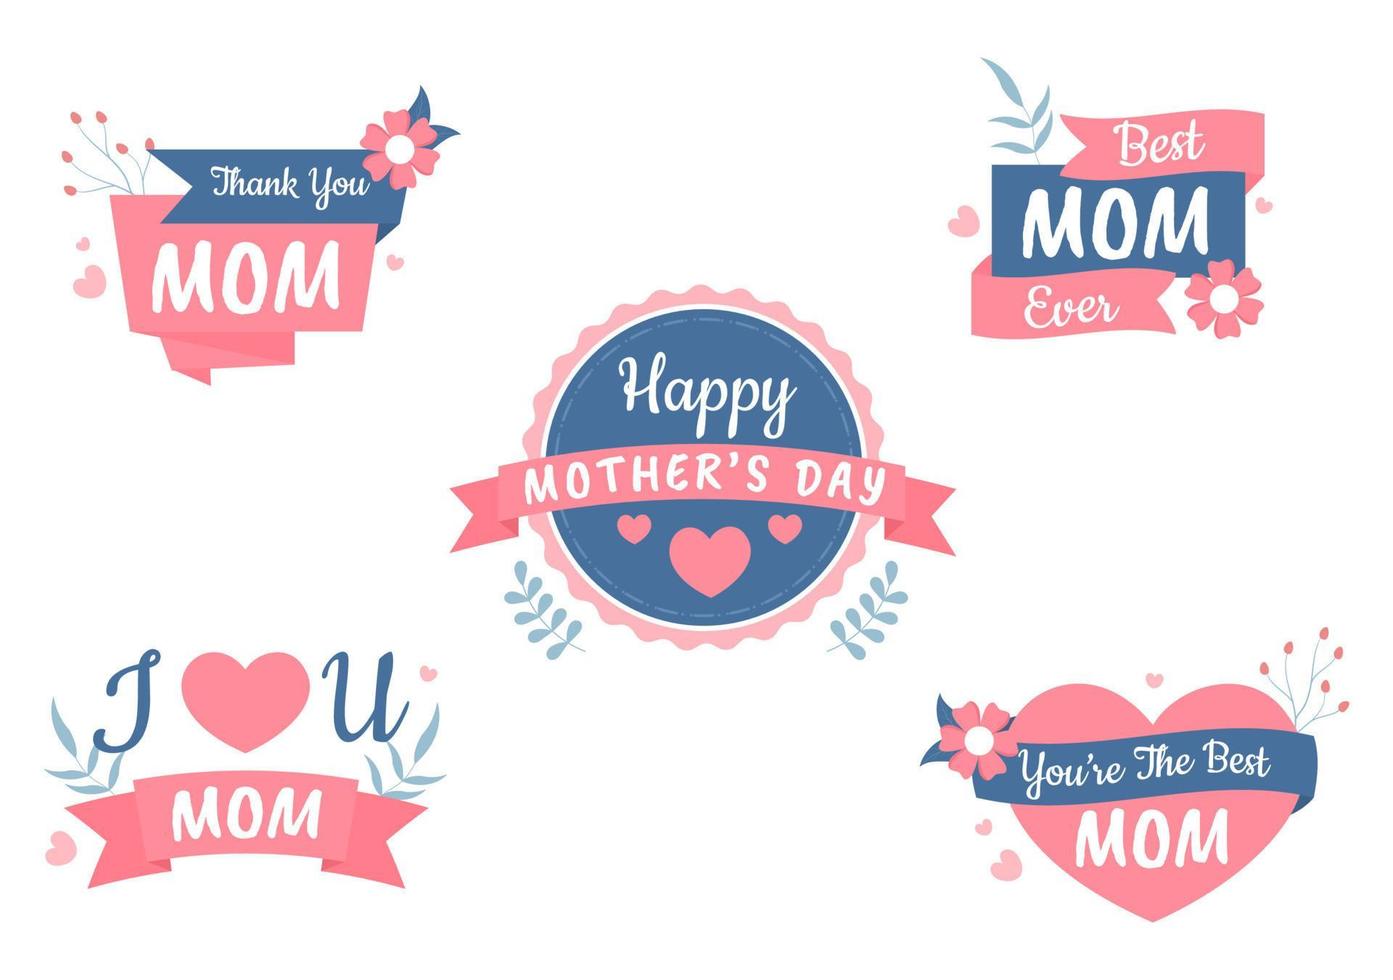 Happy Mother Day with Beautiful Blossom Flowers and Calligraphy Text Which is Commemorated on December 22 for Greeting Card or Poster Flat Design Illustration vector